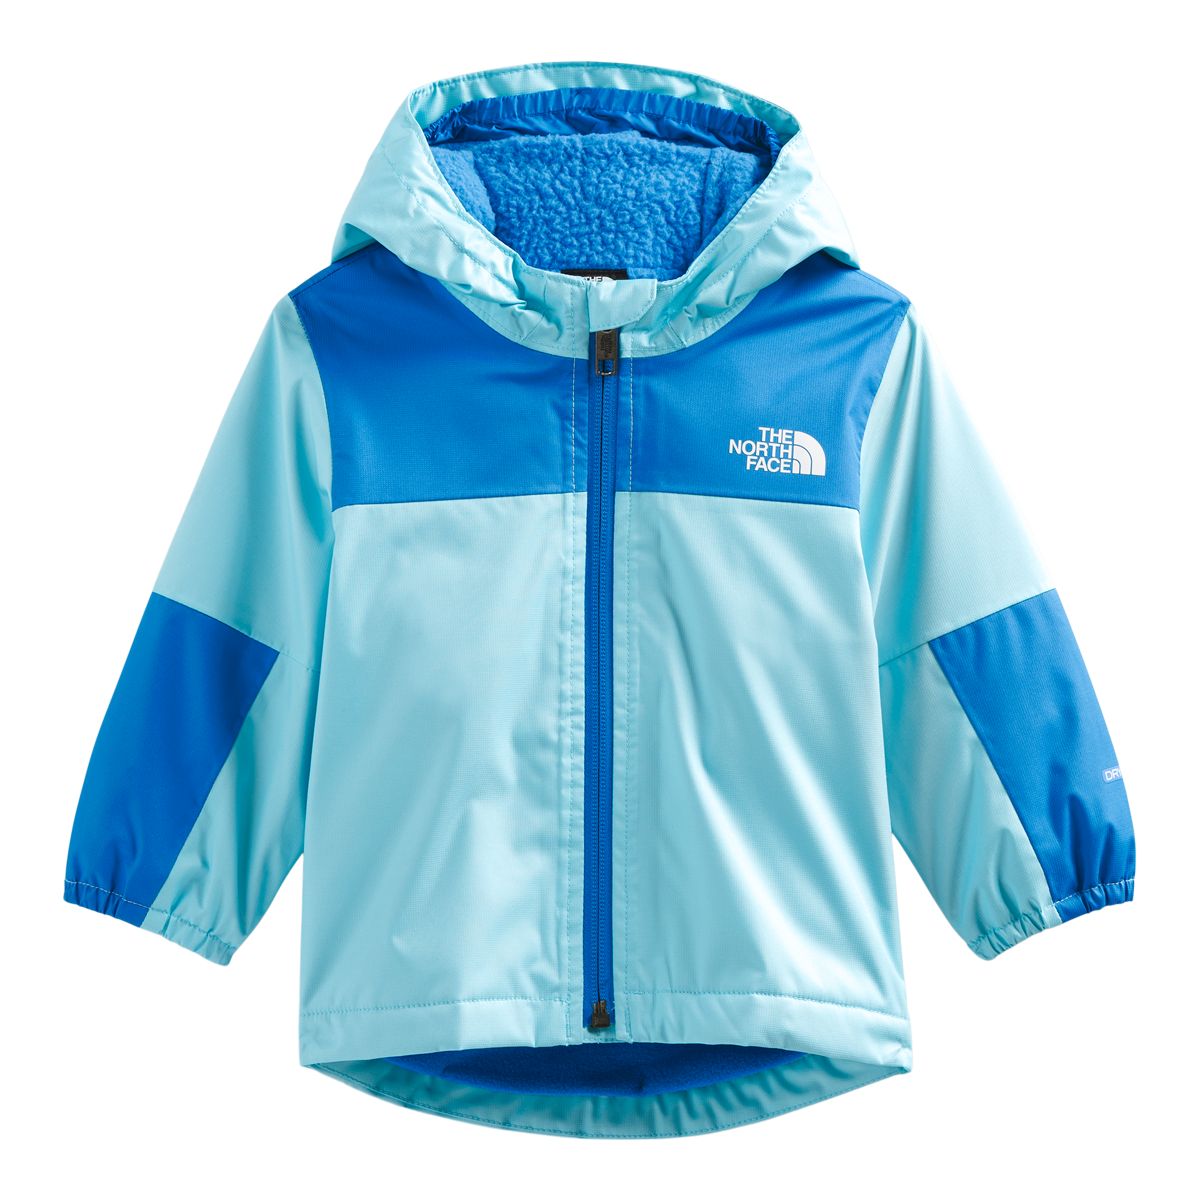 Image of The North Face Toddler Boys' Warm Storm Shell Jacket